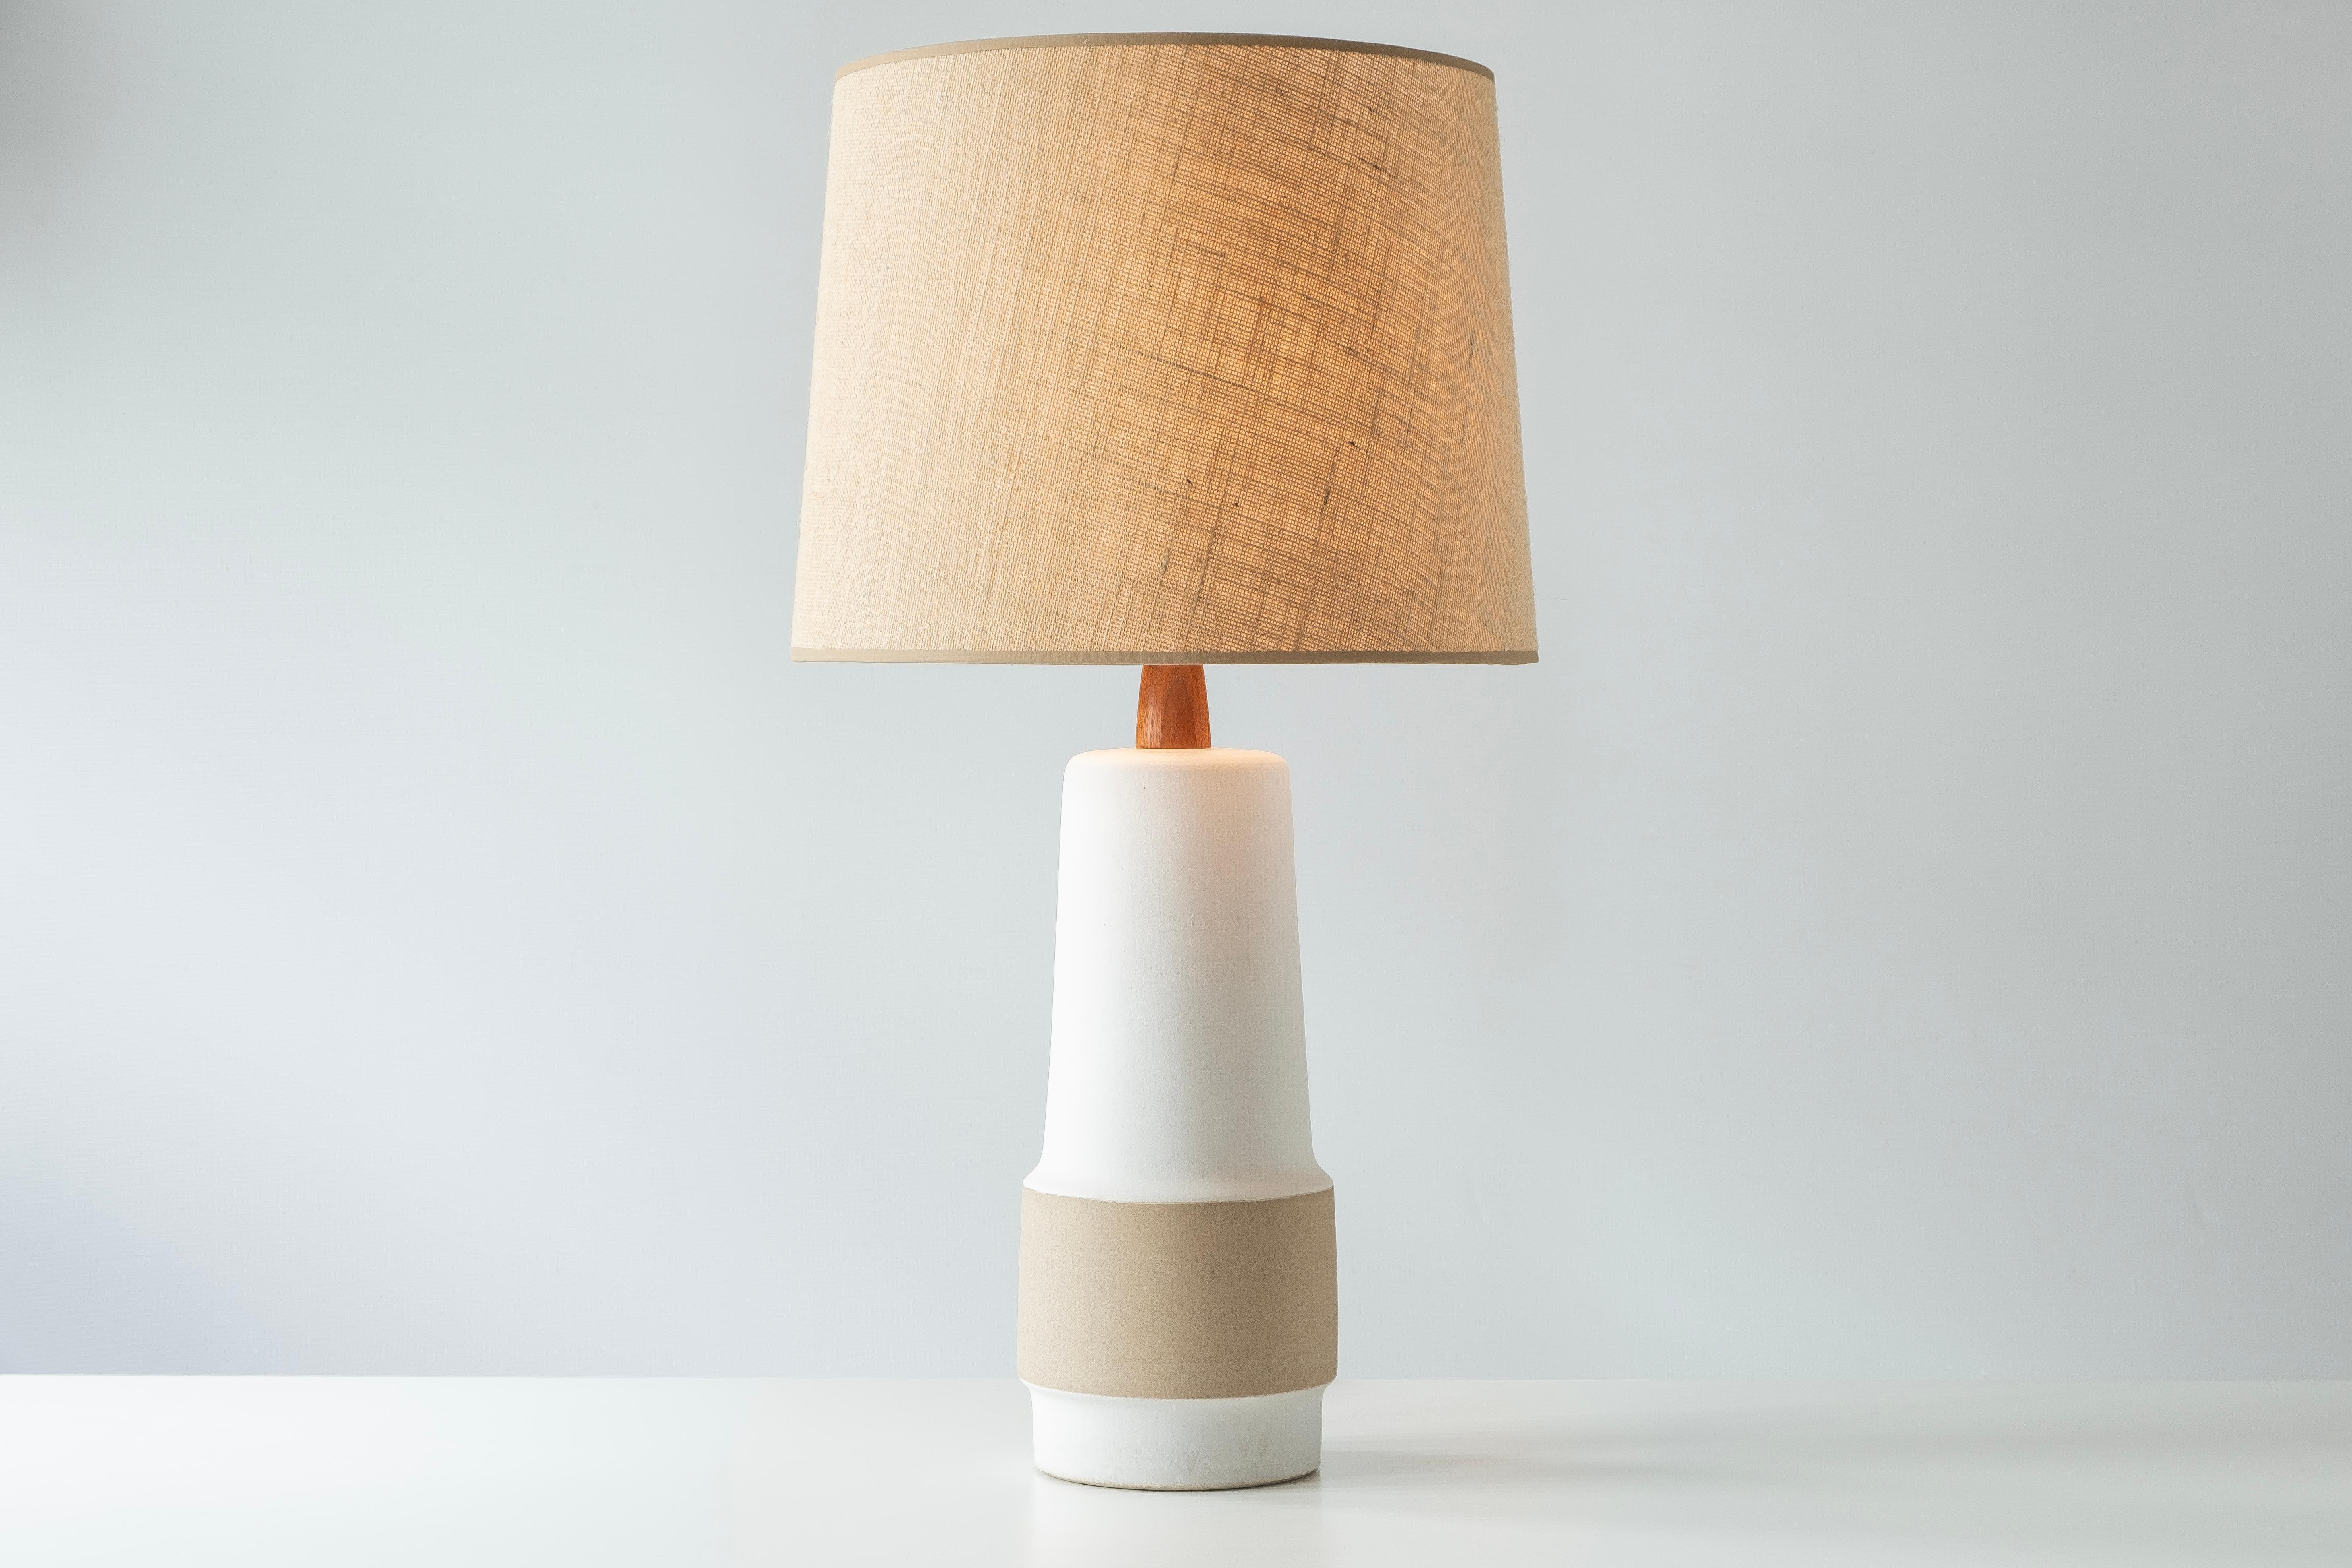 ?? WHAT IS IT?
—
This signed Martz Model 144 lamp comes in a matte, unglazed two-tone body. This model was slipcast then painted with a white slip, giving the lamp its white color. The tan stripe is the natural, unglazed clay body color. Catalog